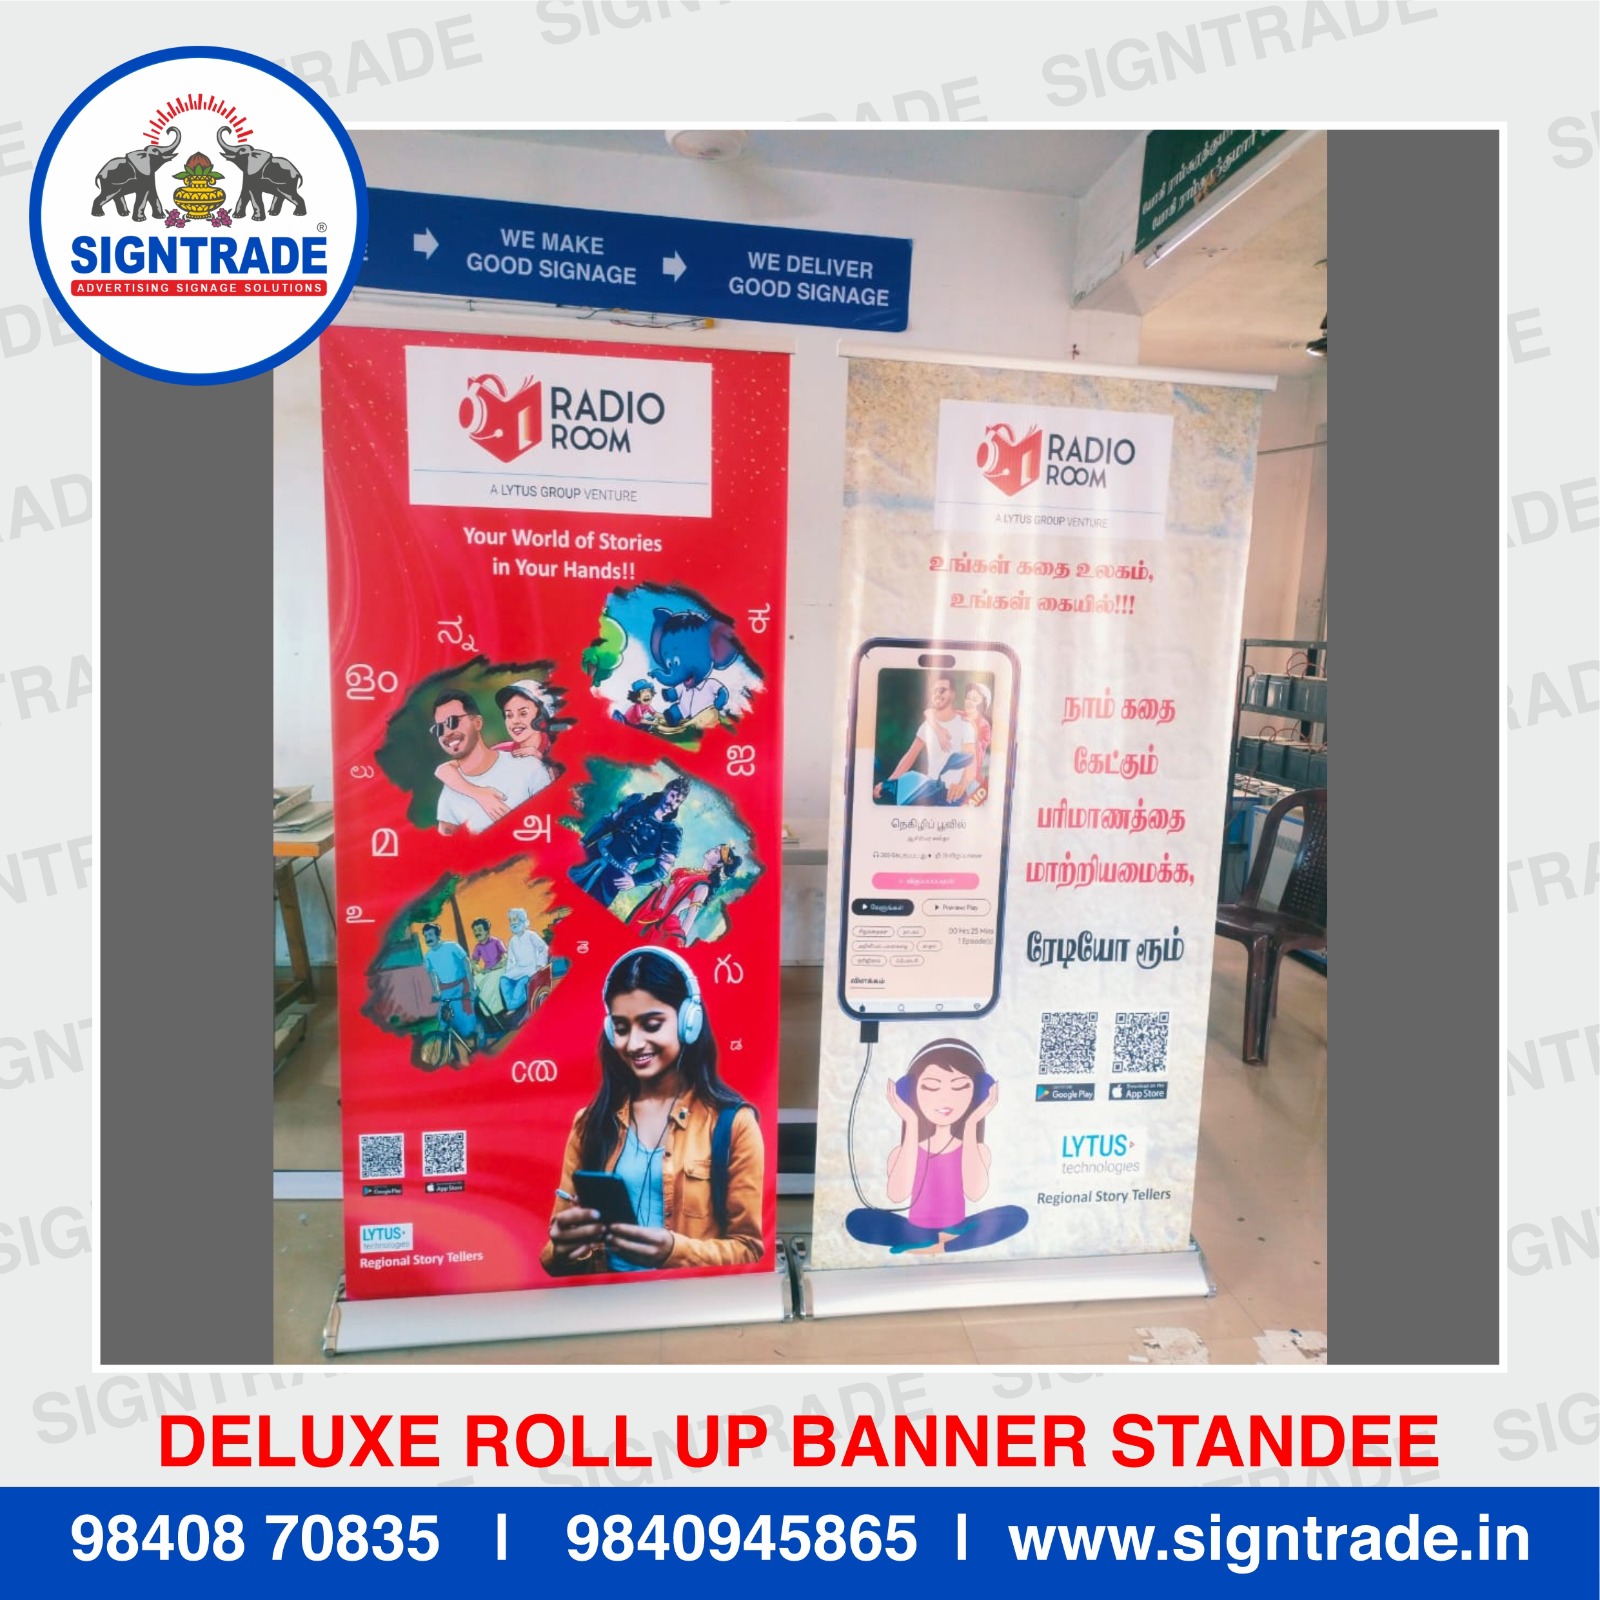 Deluxe Rollup Banner Standee in Chennai